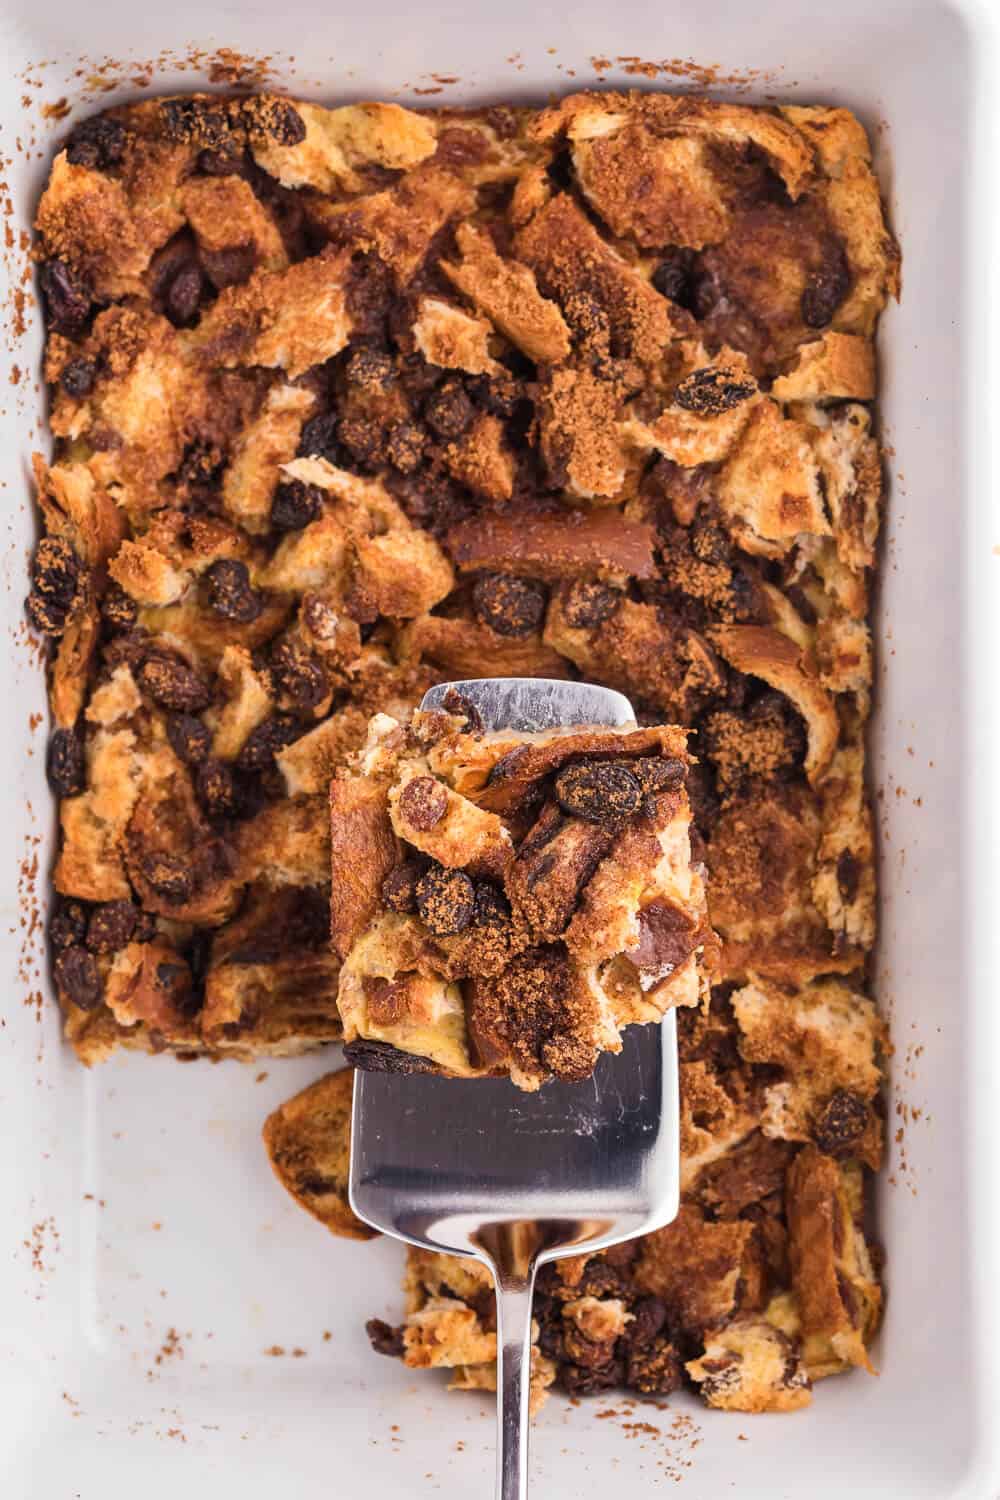 Cinnamon Raisin French Toast Casserole - Sweeten your mornings with this divine baked French Toast casserole recipe! It’s bursting with raisins, cinnamon and yummy raisin bread.